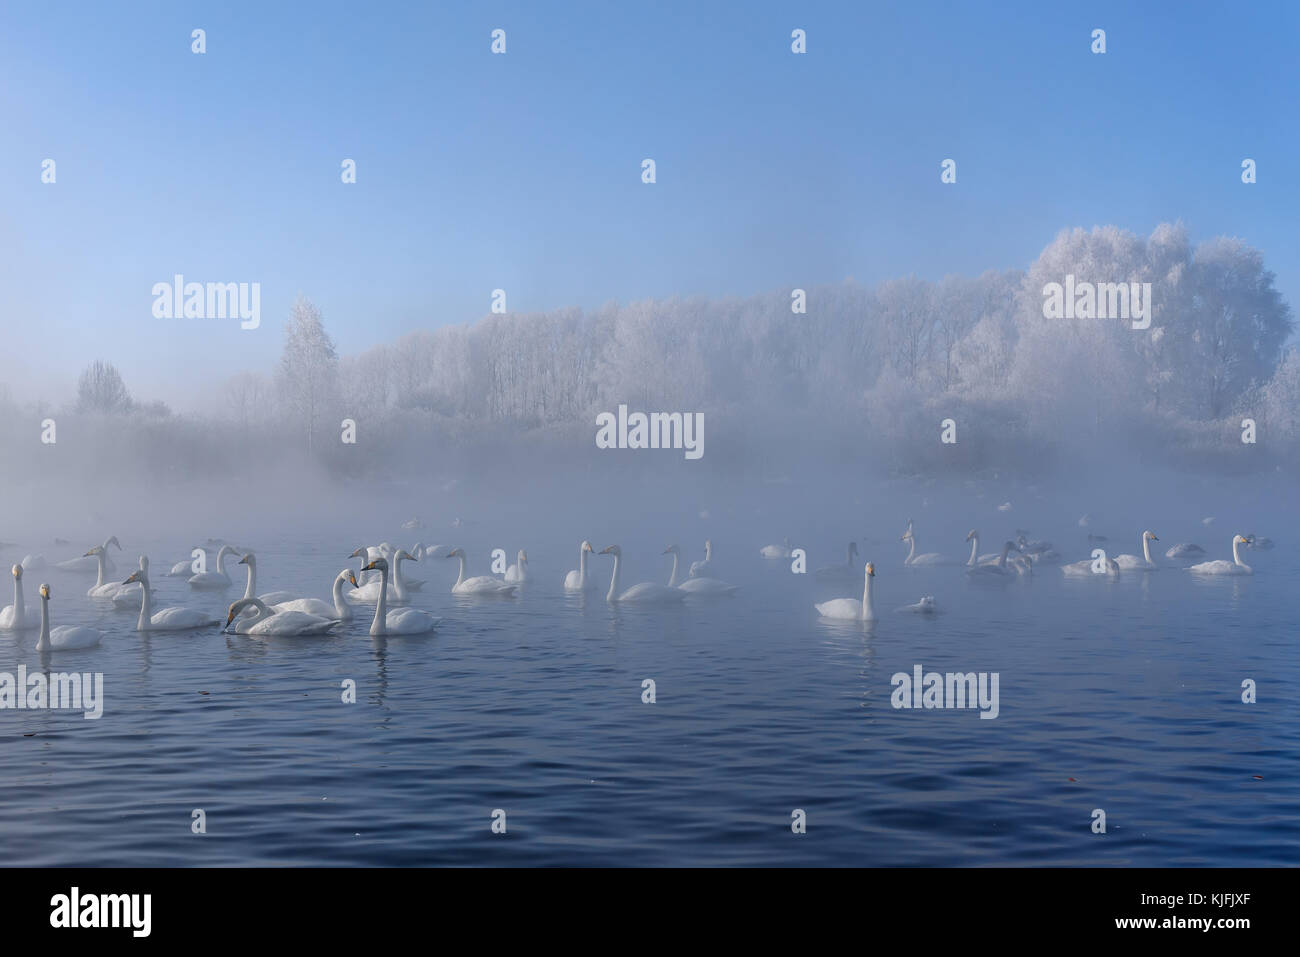 Beautiful winter landscape with swans swimming in the fog on a lake on a frosty sunny day Stock Photo